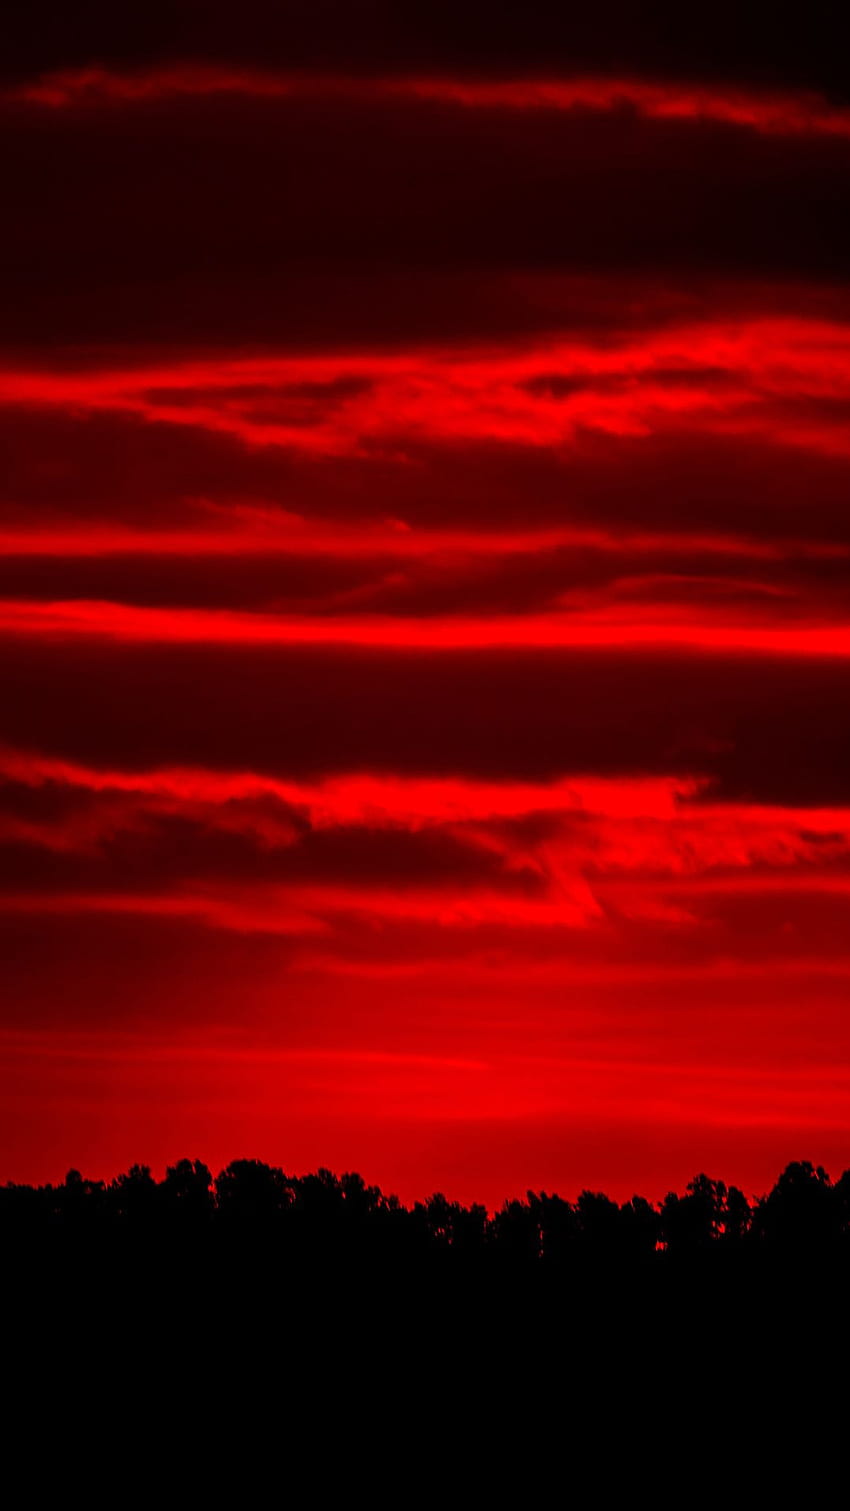 1920x1080px, 1080P Free download | Red Colour, Red Colour Sunset, Red ...